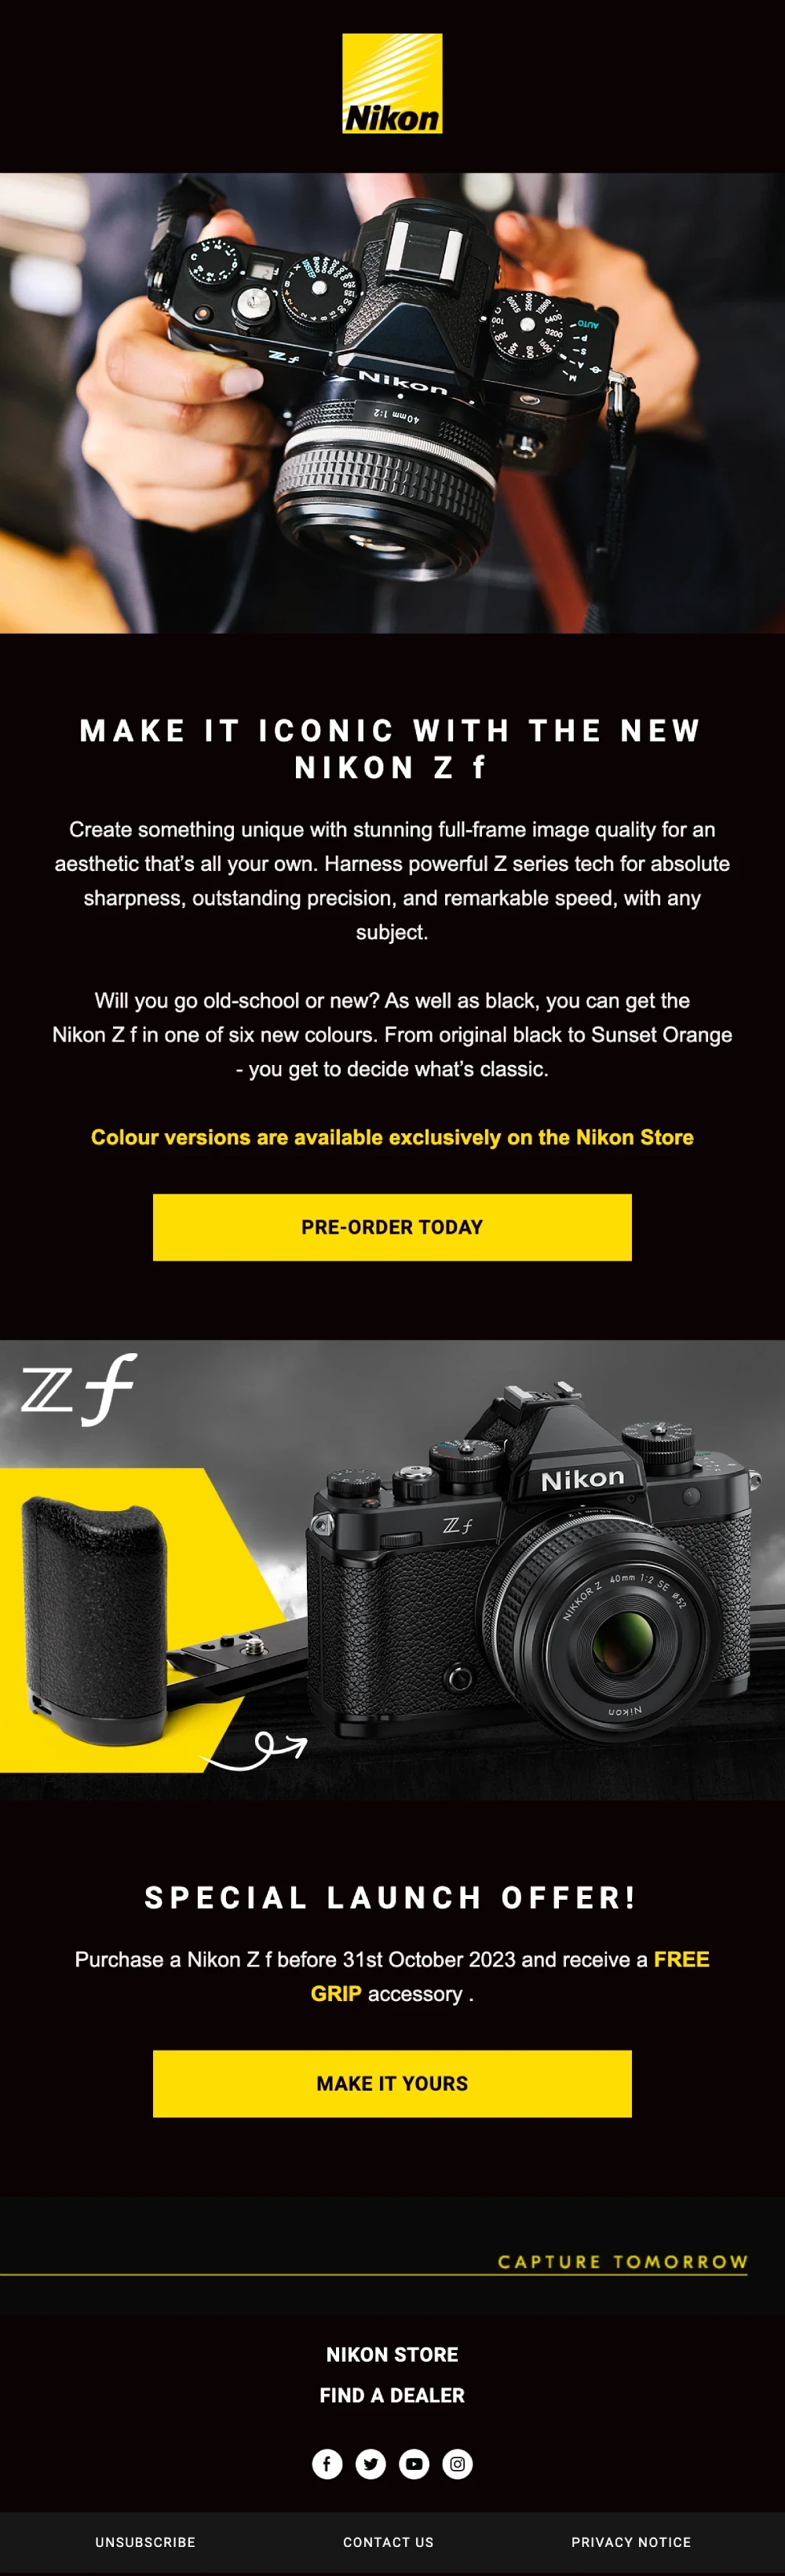 A product launch email from Nikon with a black background and yellow CTAs.